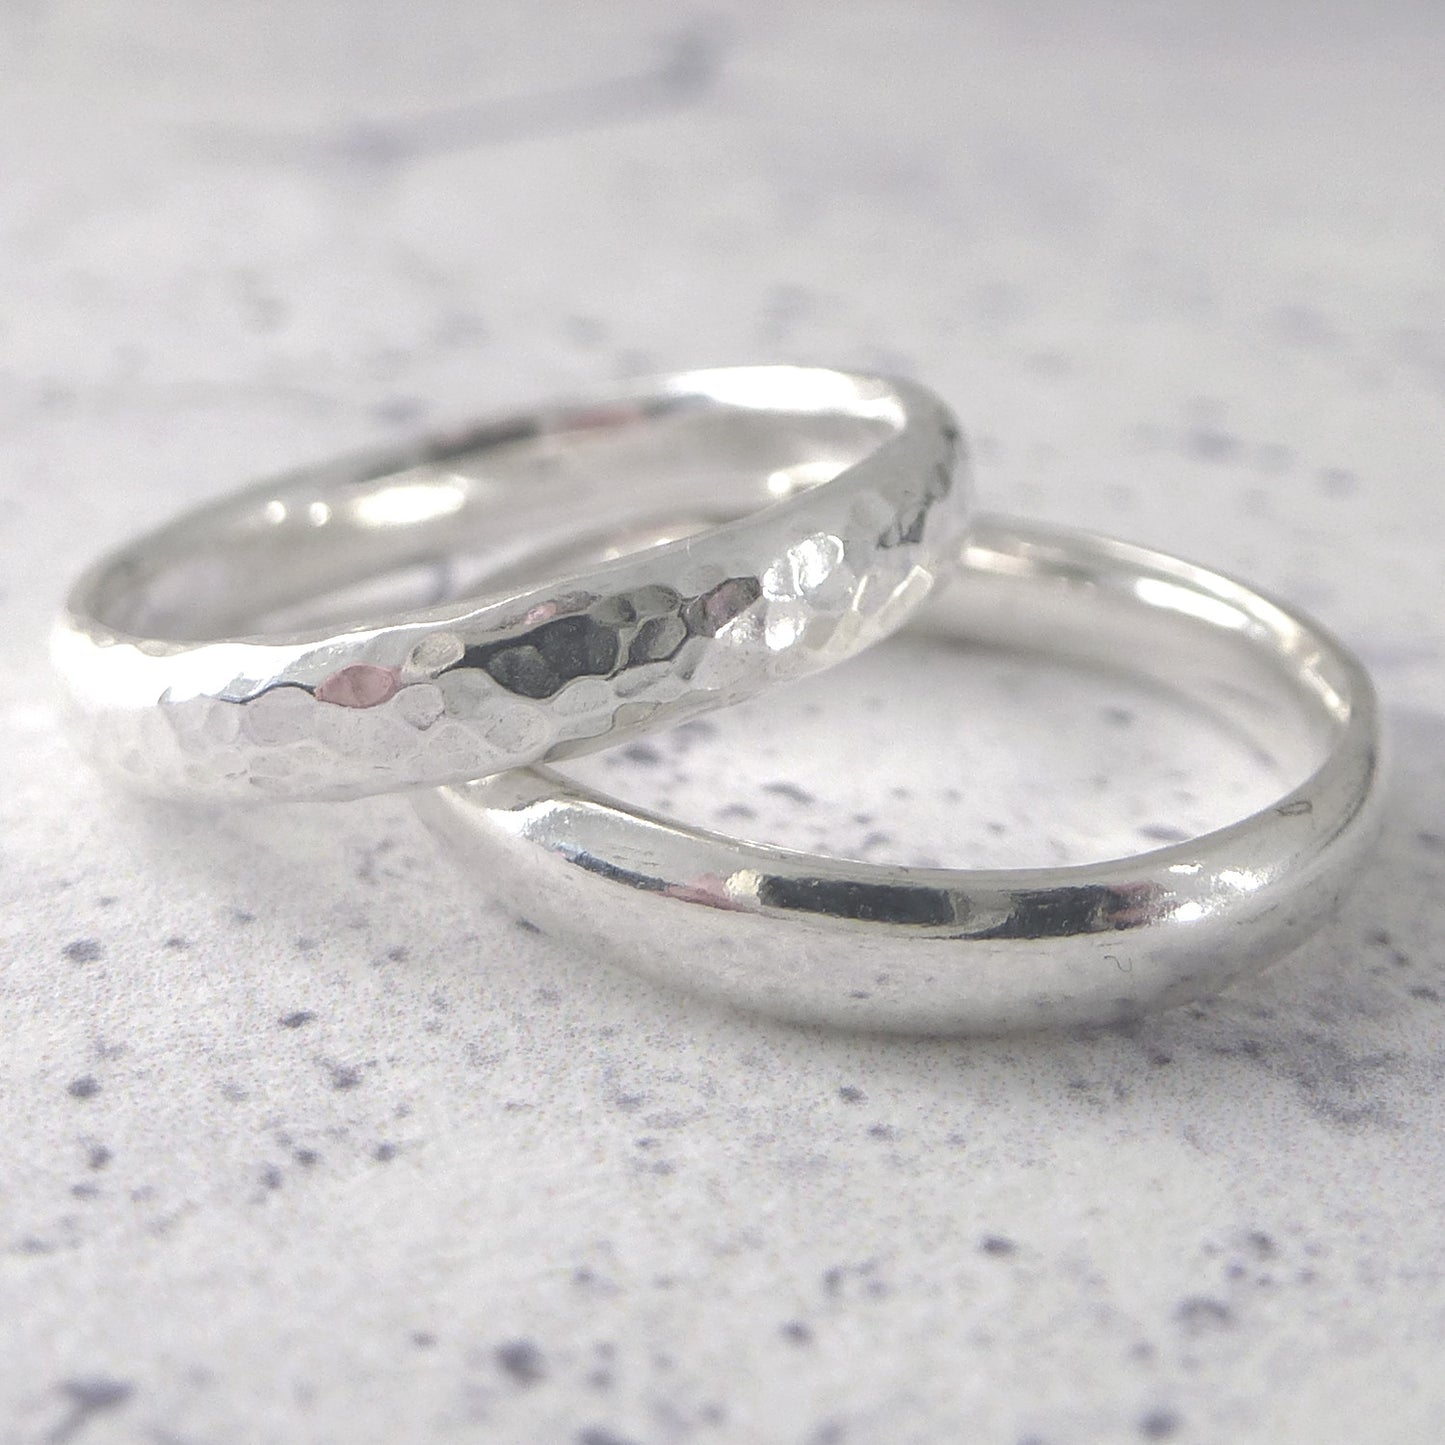 Hand Shaped Band Ring in Sterling Silver - 3mm - Hammered or Smooth